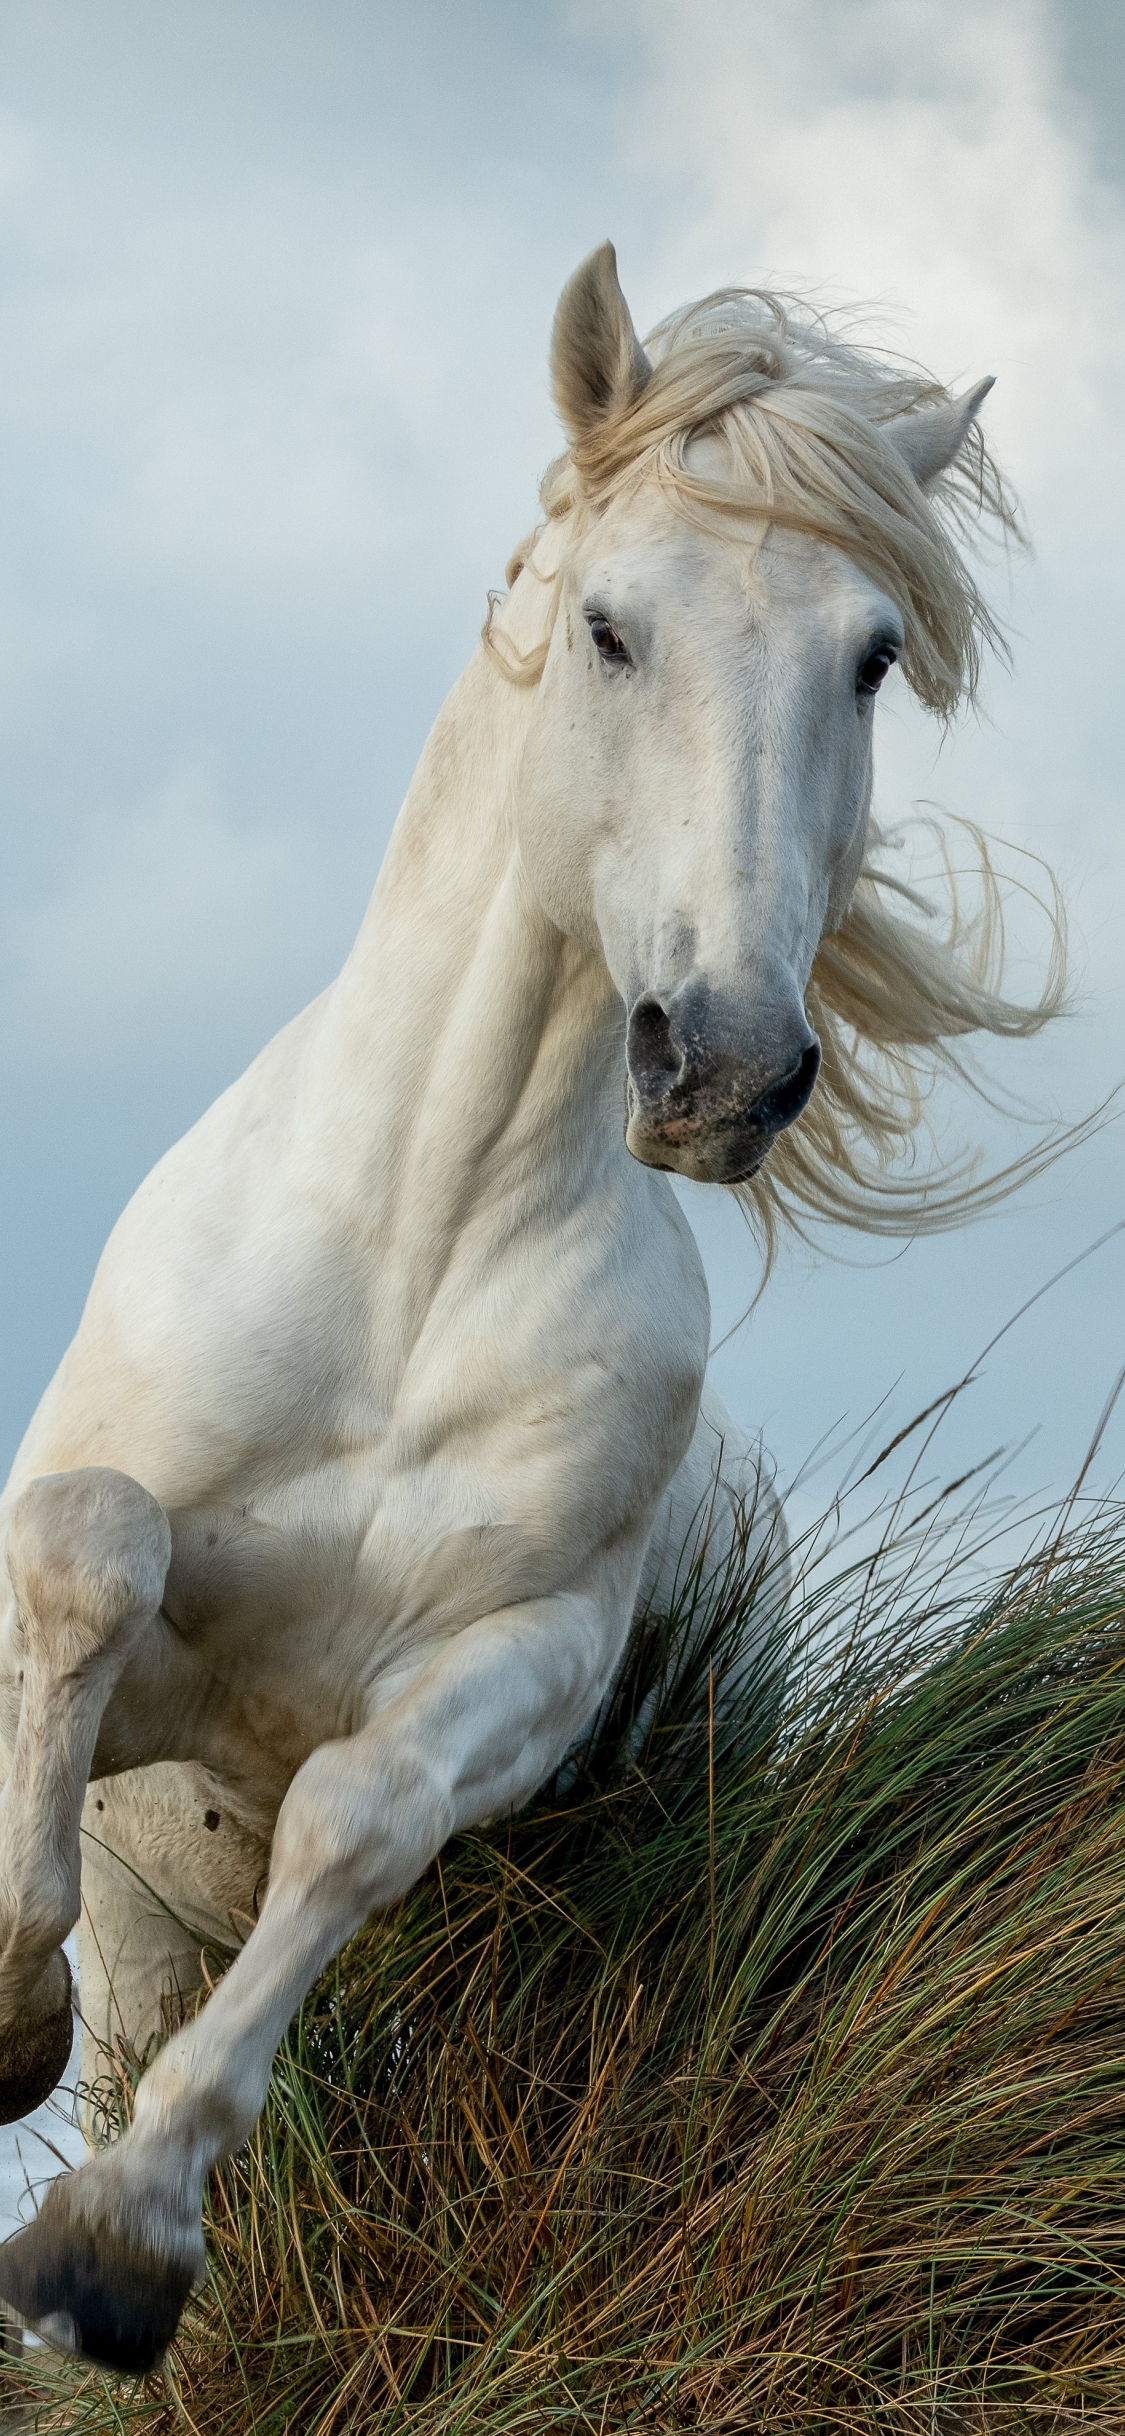 1125x2436 Download white horse, run, animal wallpaper, iphone x, hd image, background, 26277